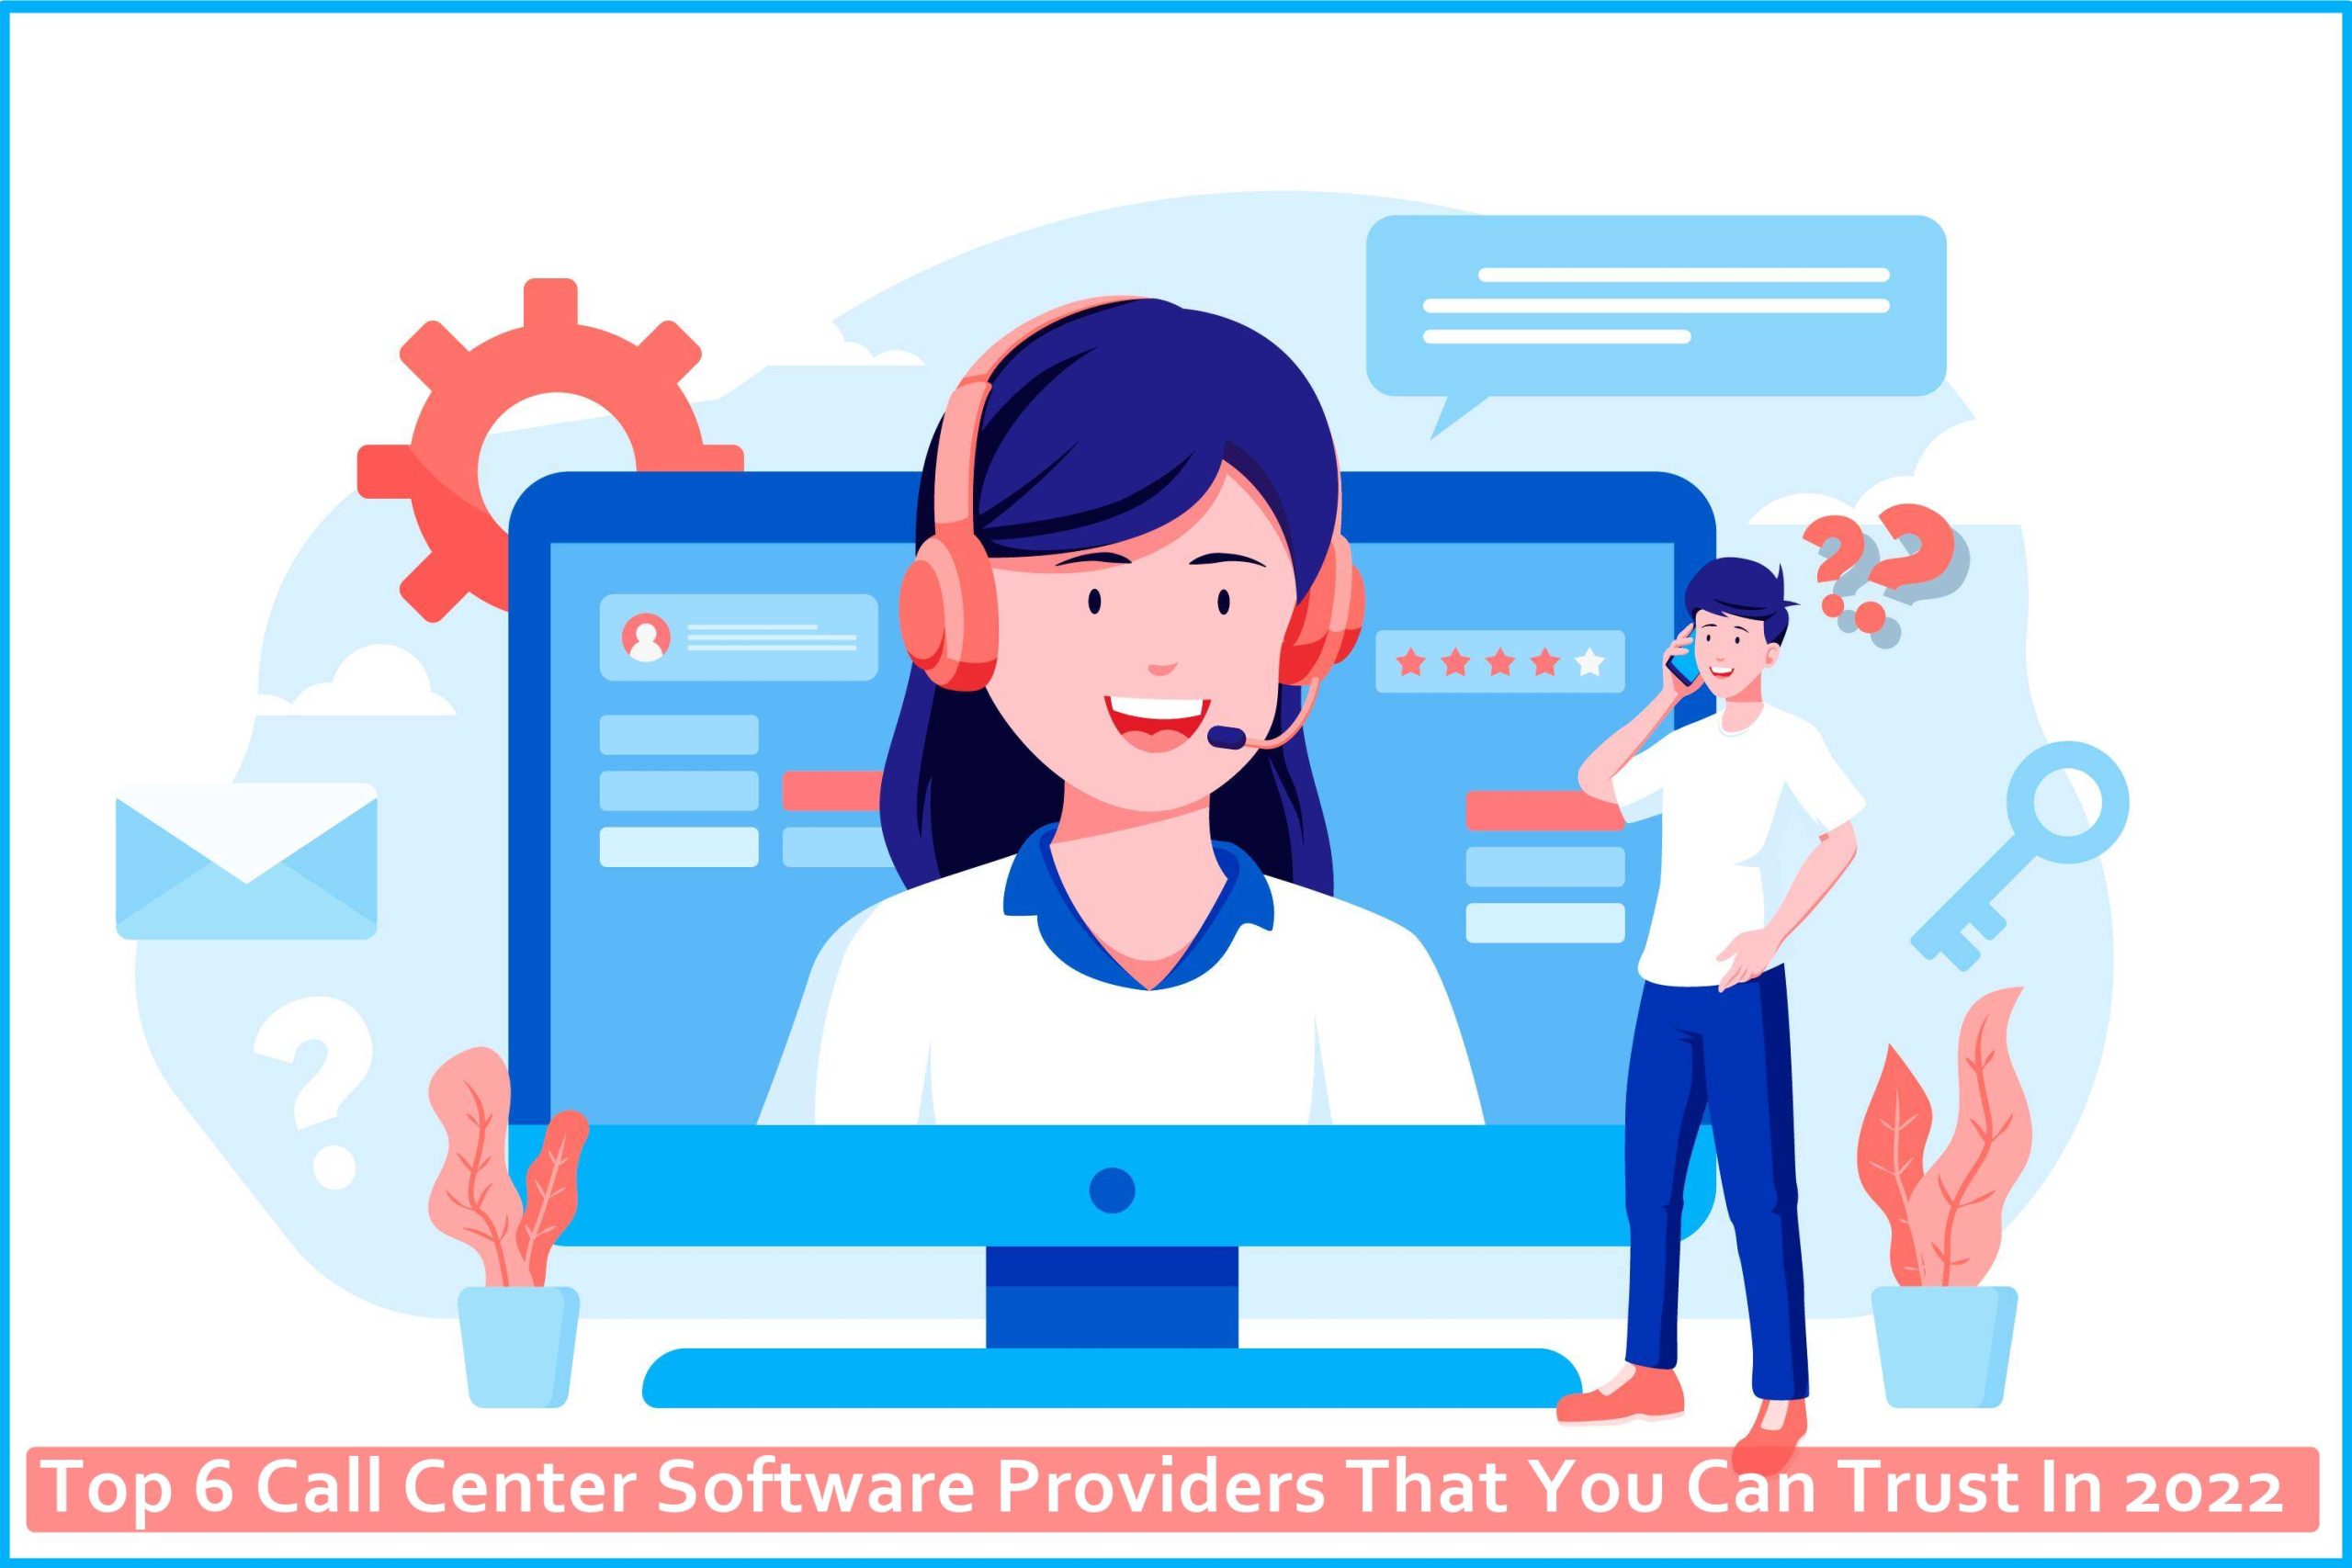 Top 6 Call Center Software Providers That You Can Trust In 2022